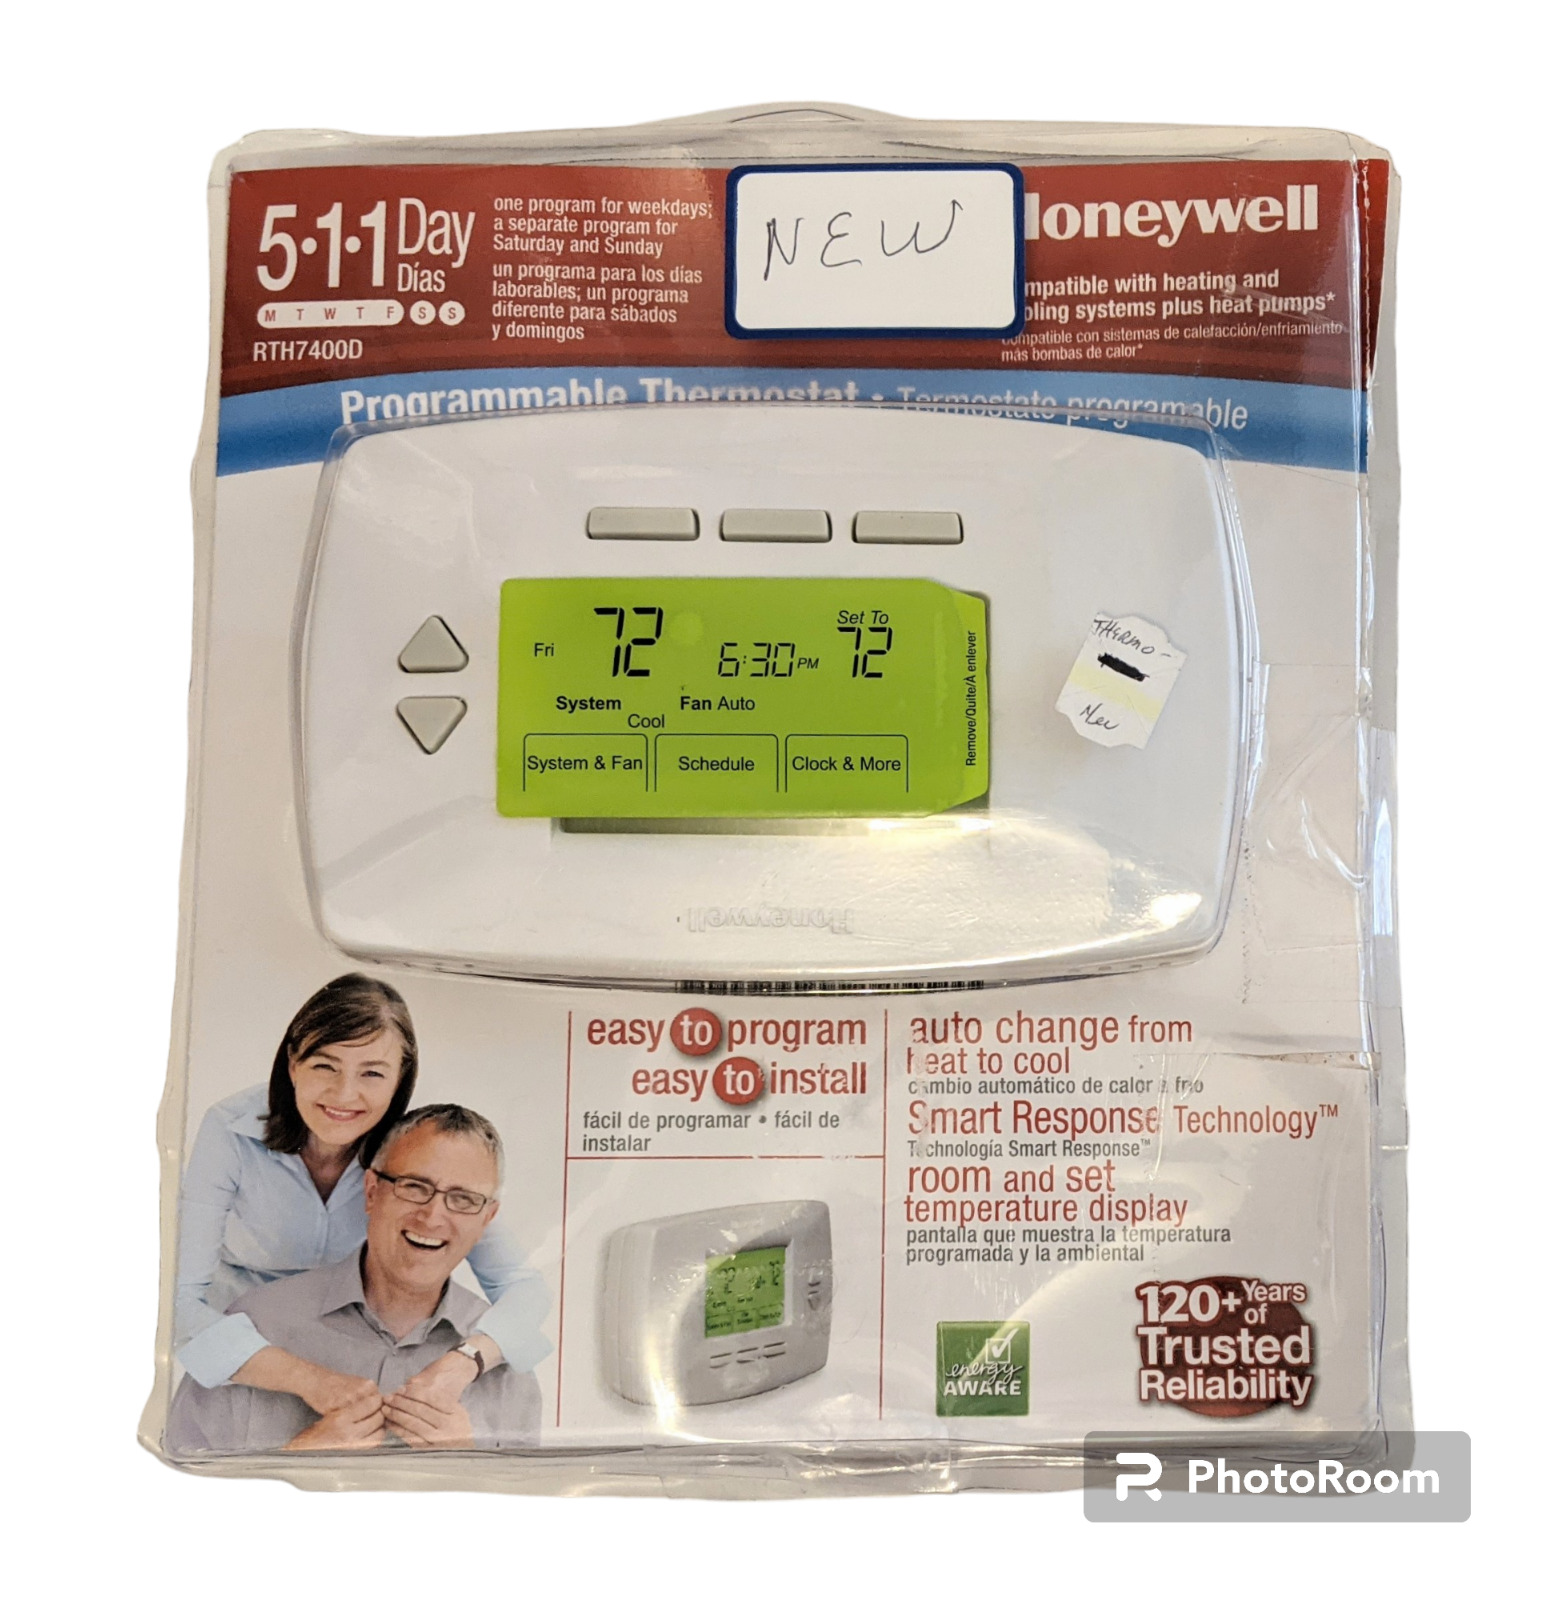 HONEYWELL 5-1-1 Day Digital Thermostat Programmable RTH7400D Conventional